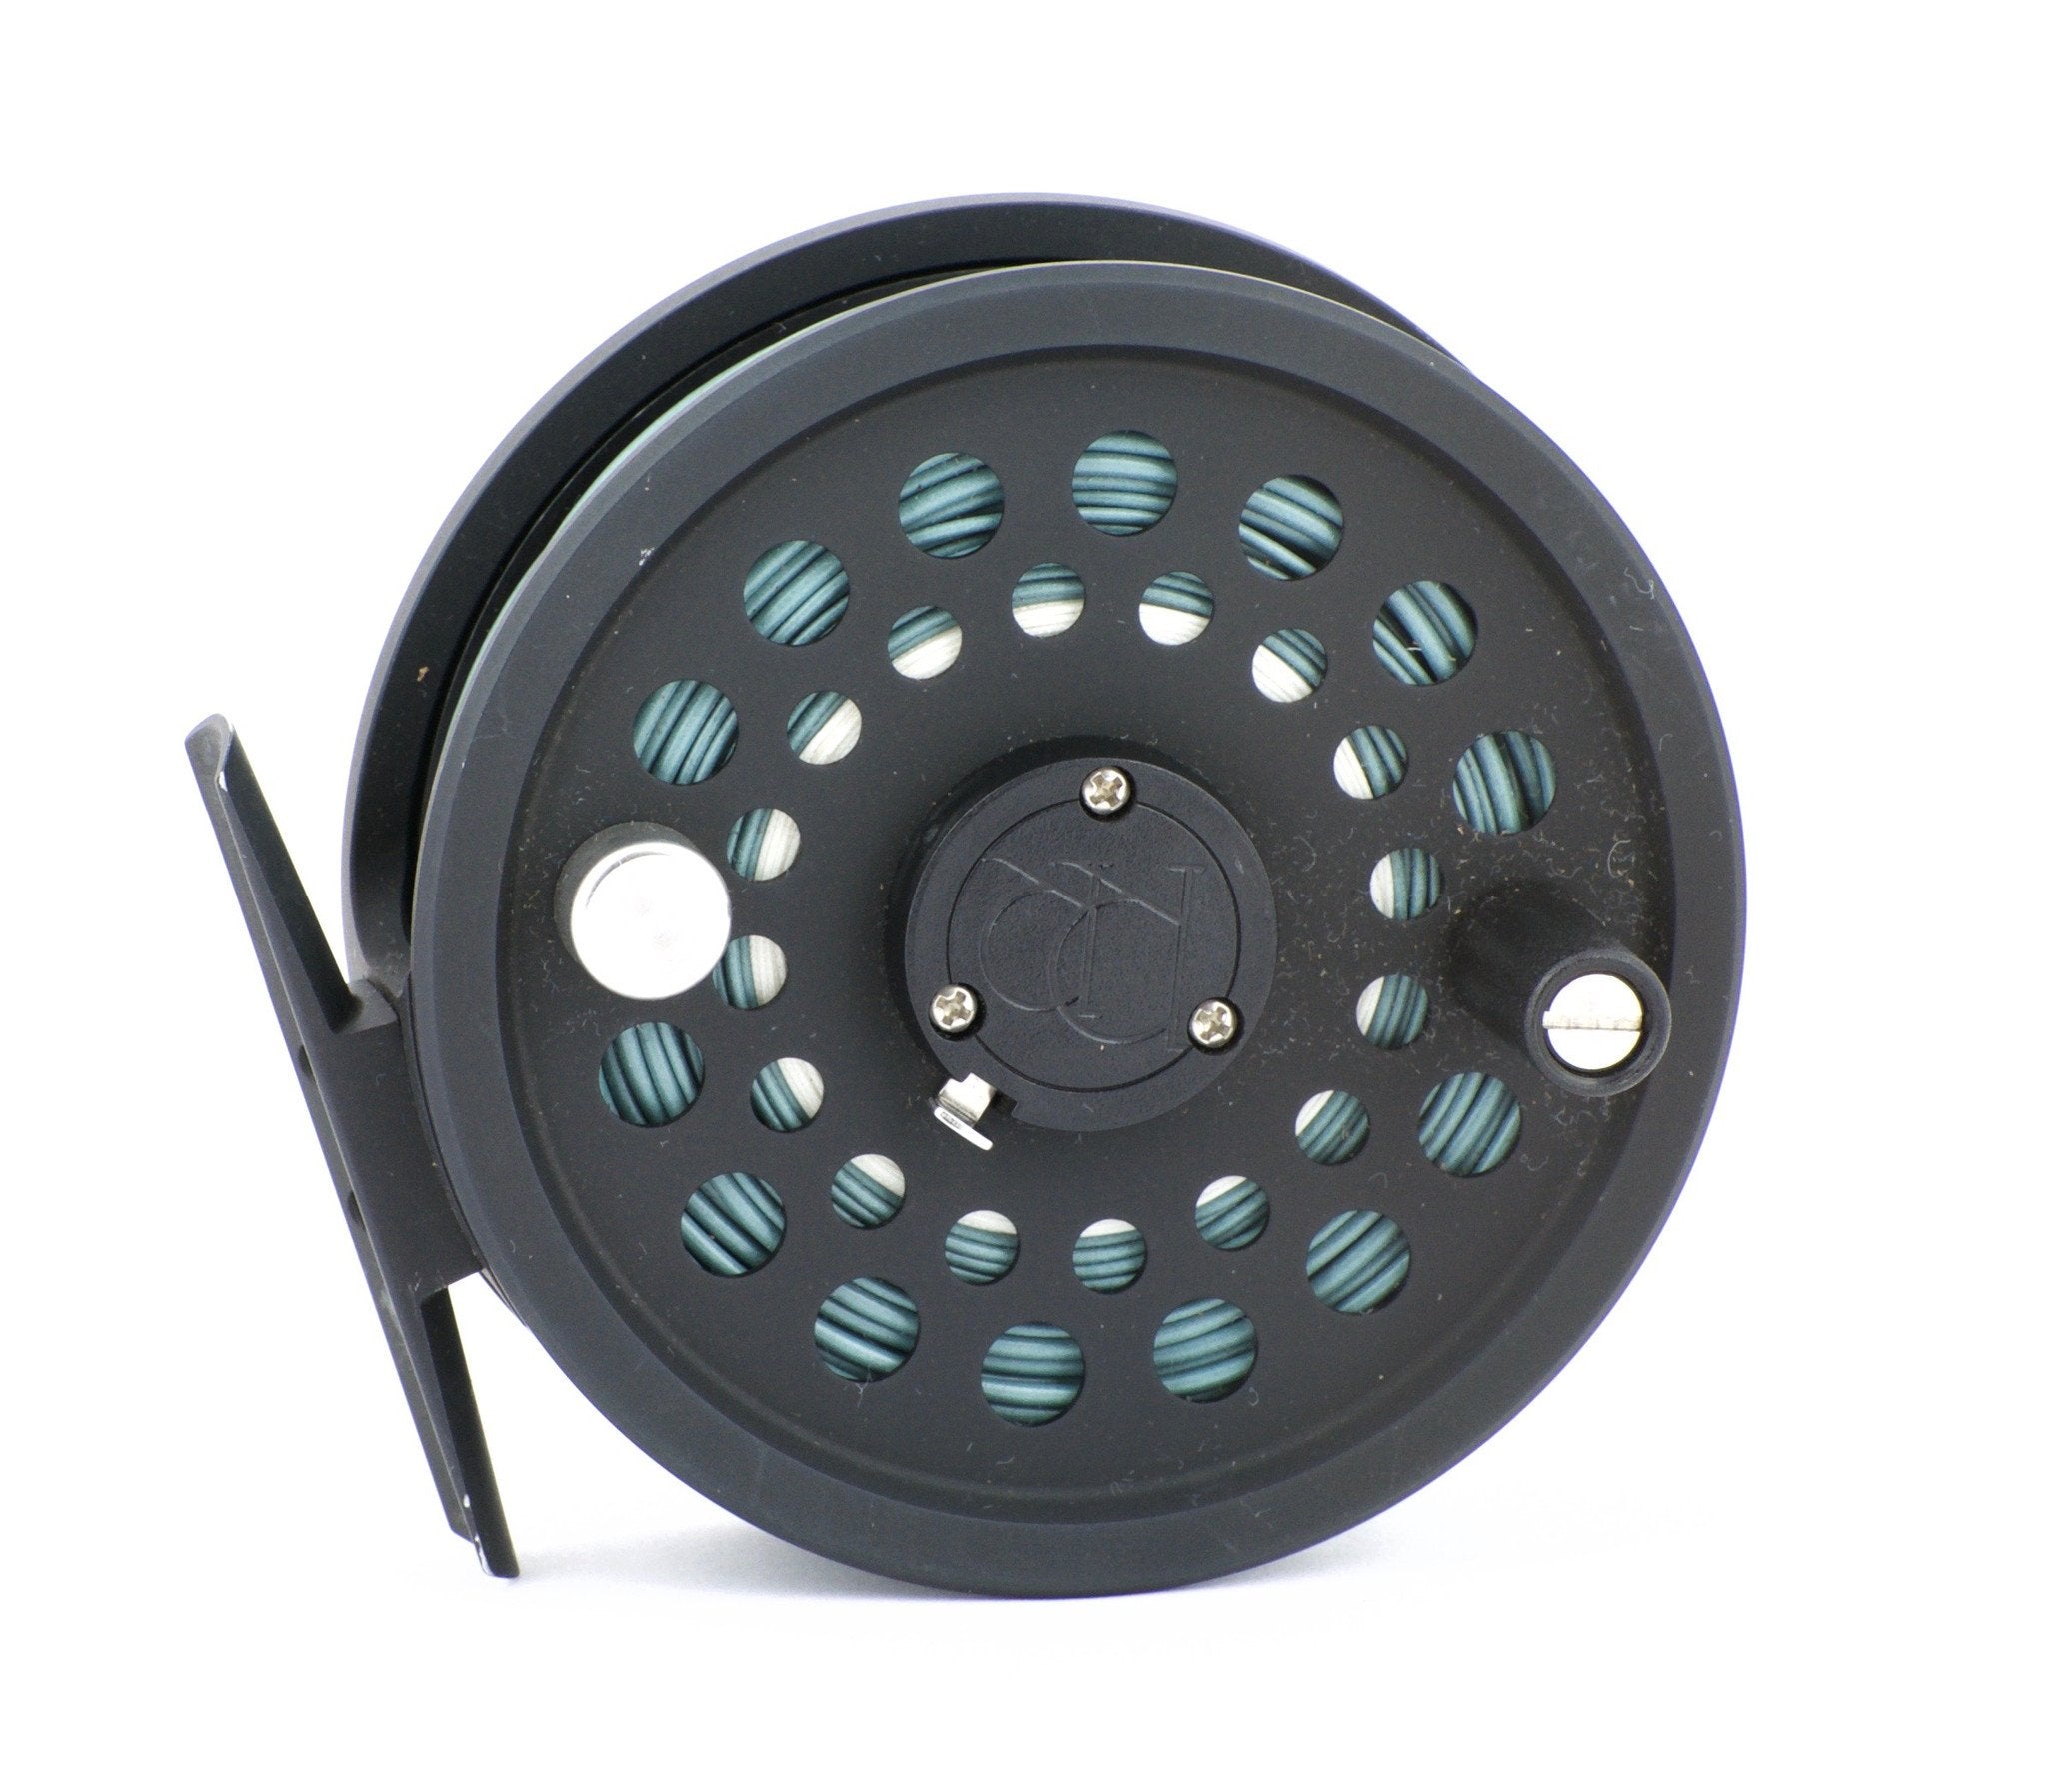 GUNNISON ROSS G1 Fly Fish Spool Used $210.75 - PicClick